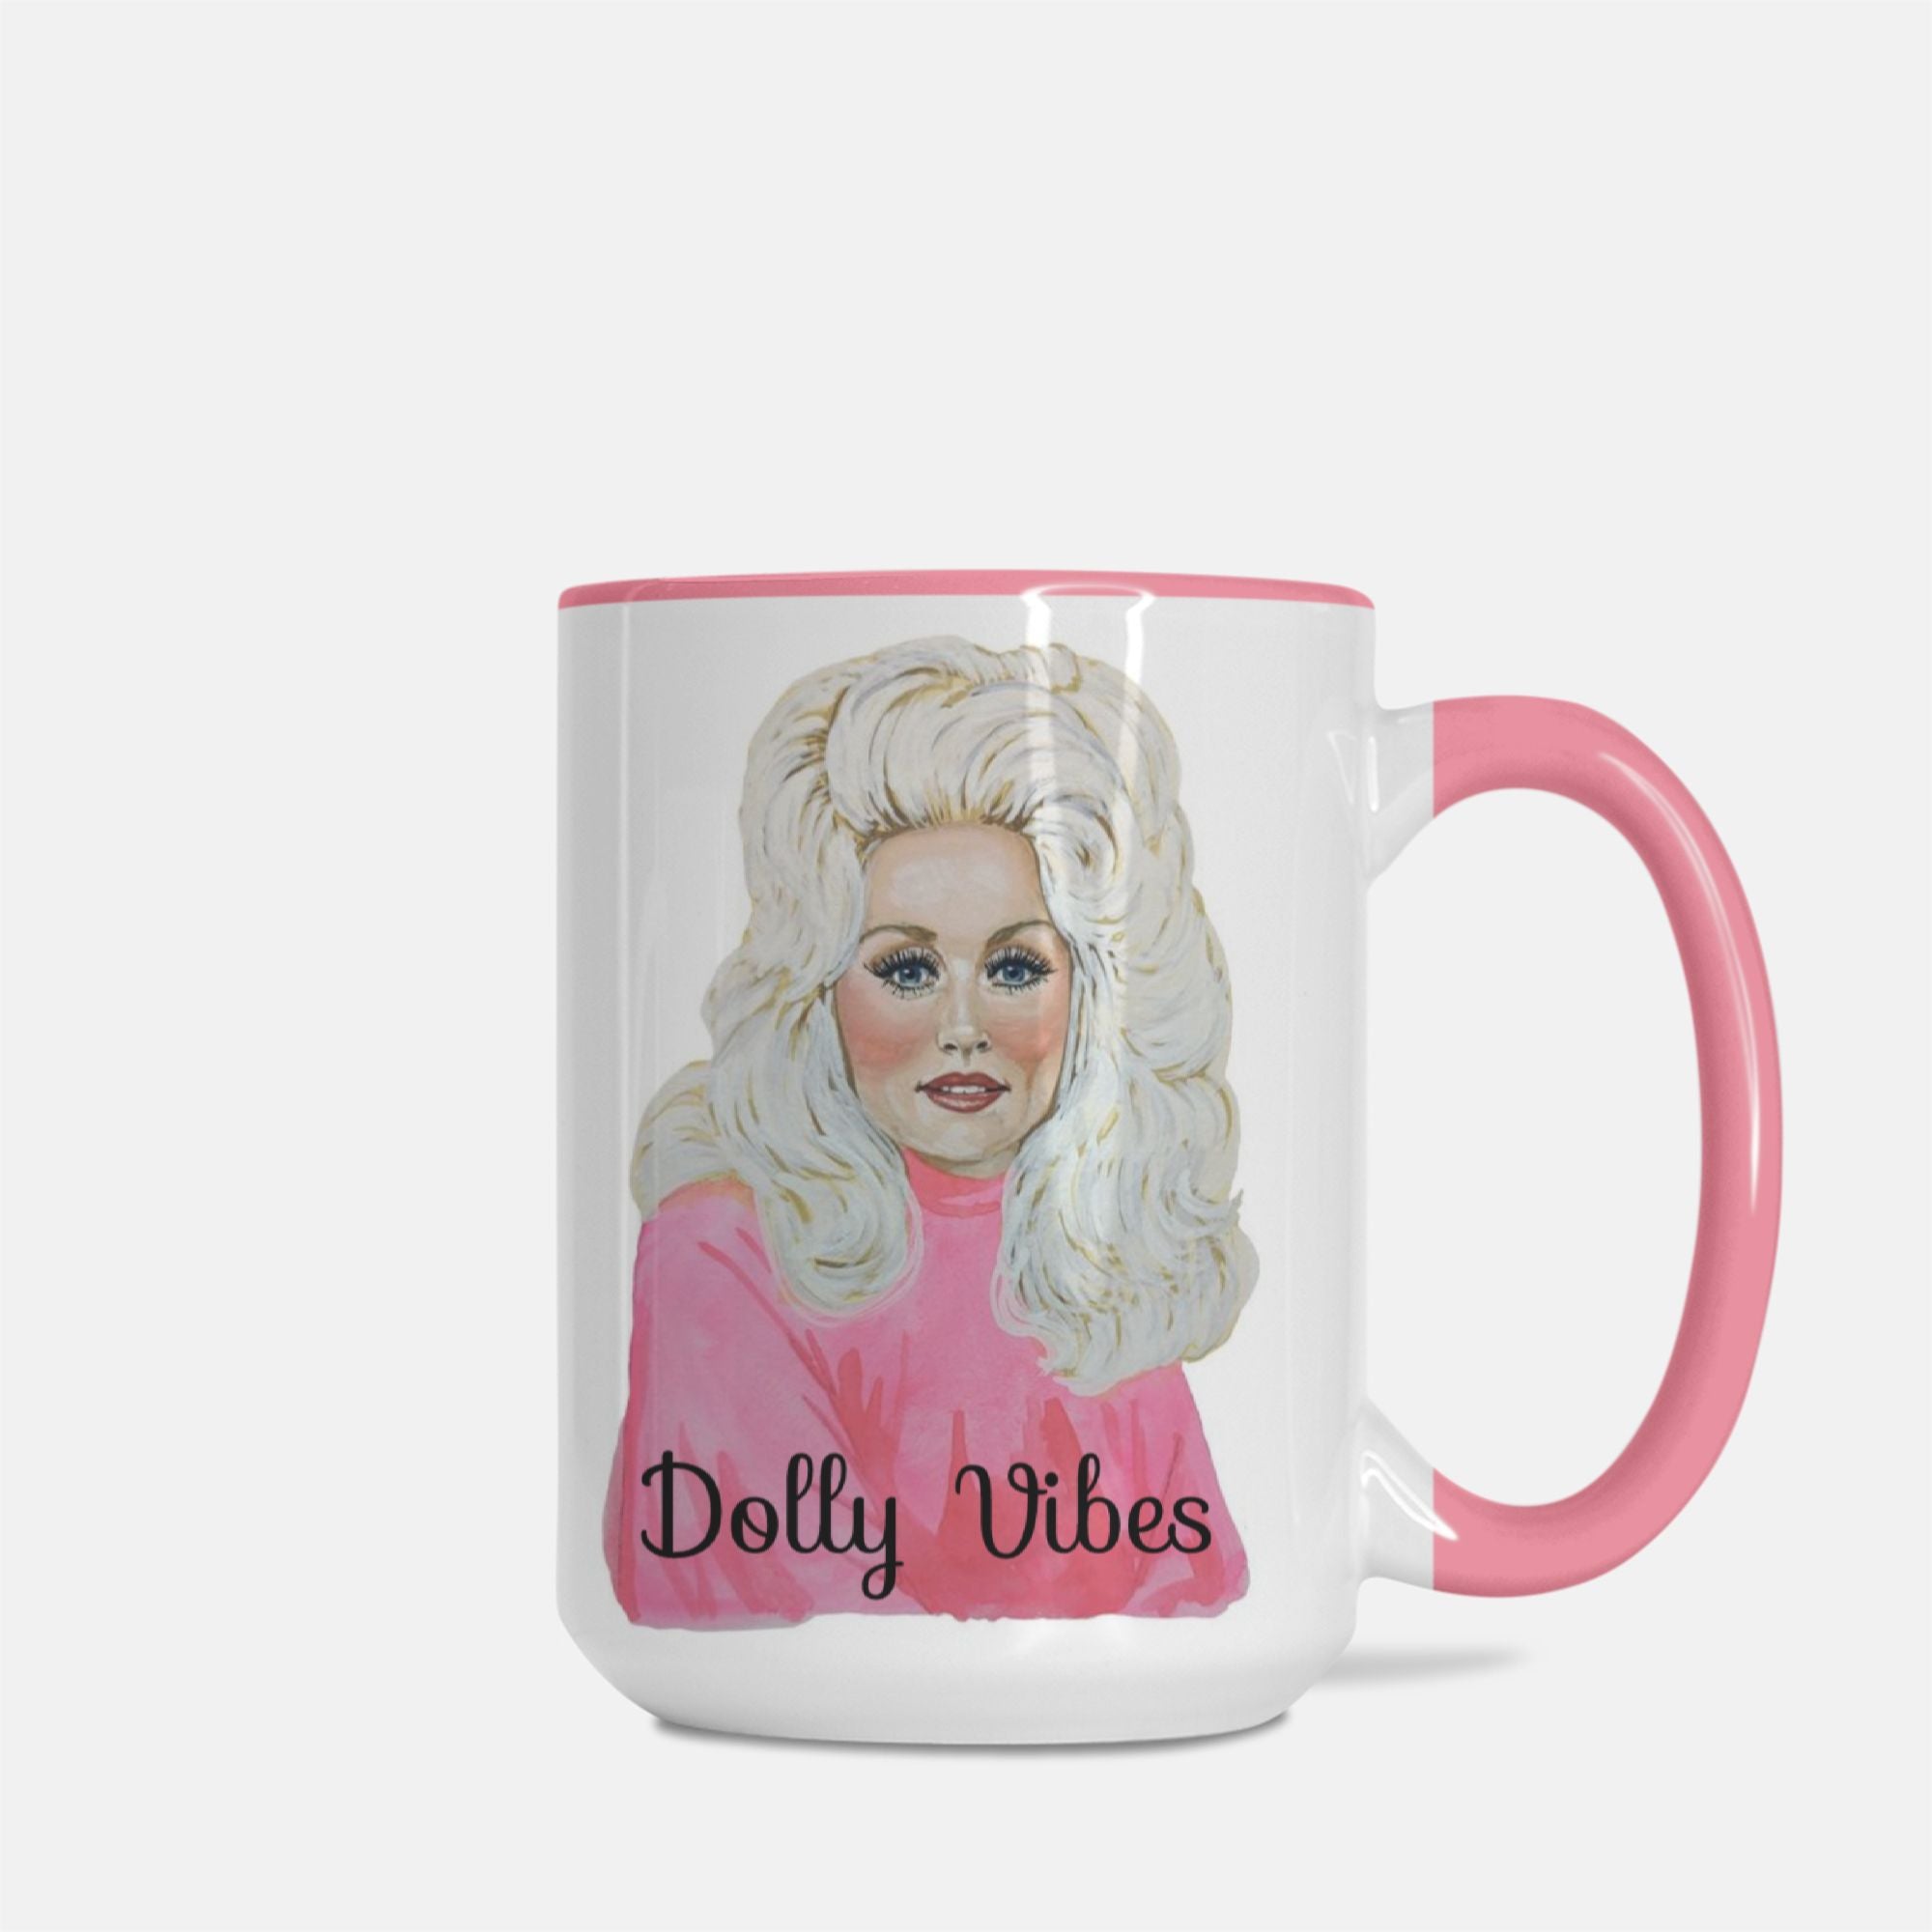 Dolly Vibes Mug Deluxe 15oz. (Pink + White)